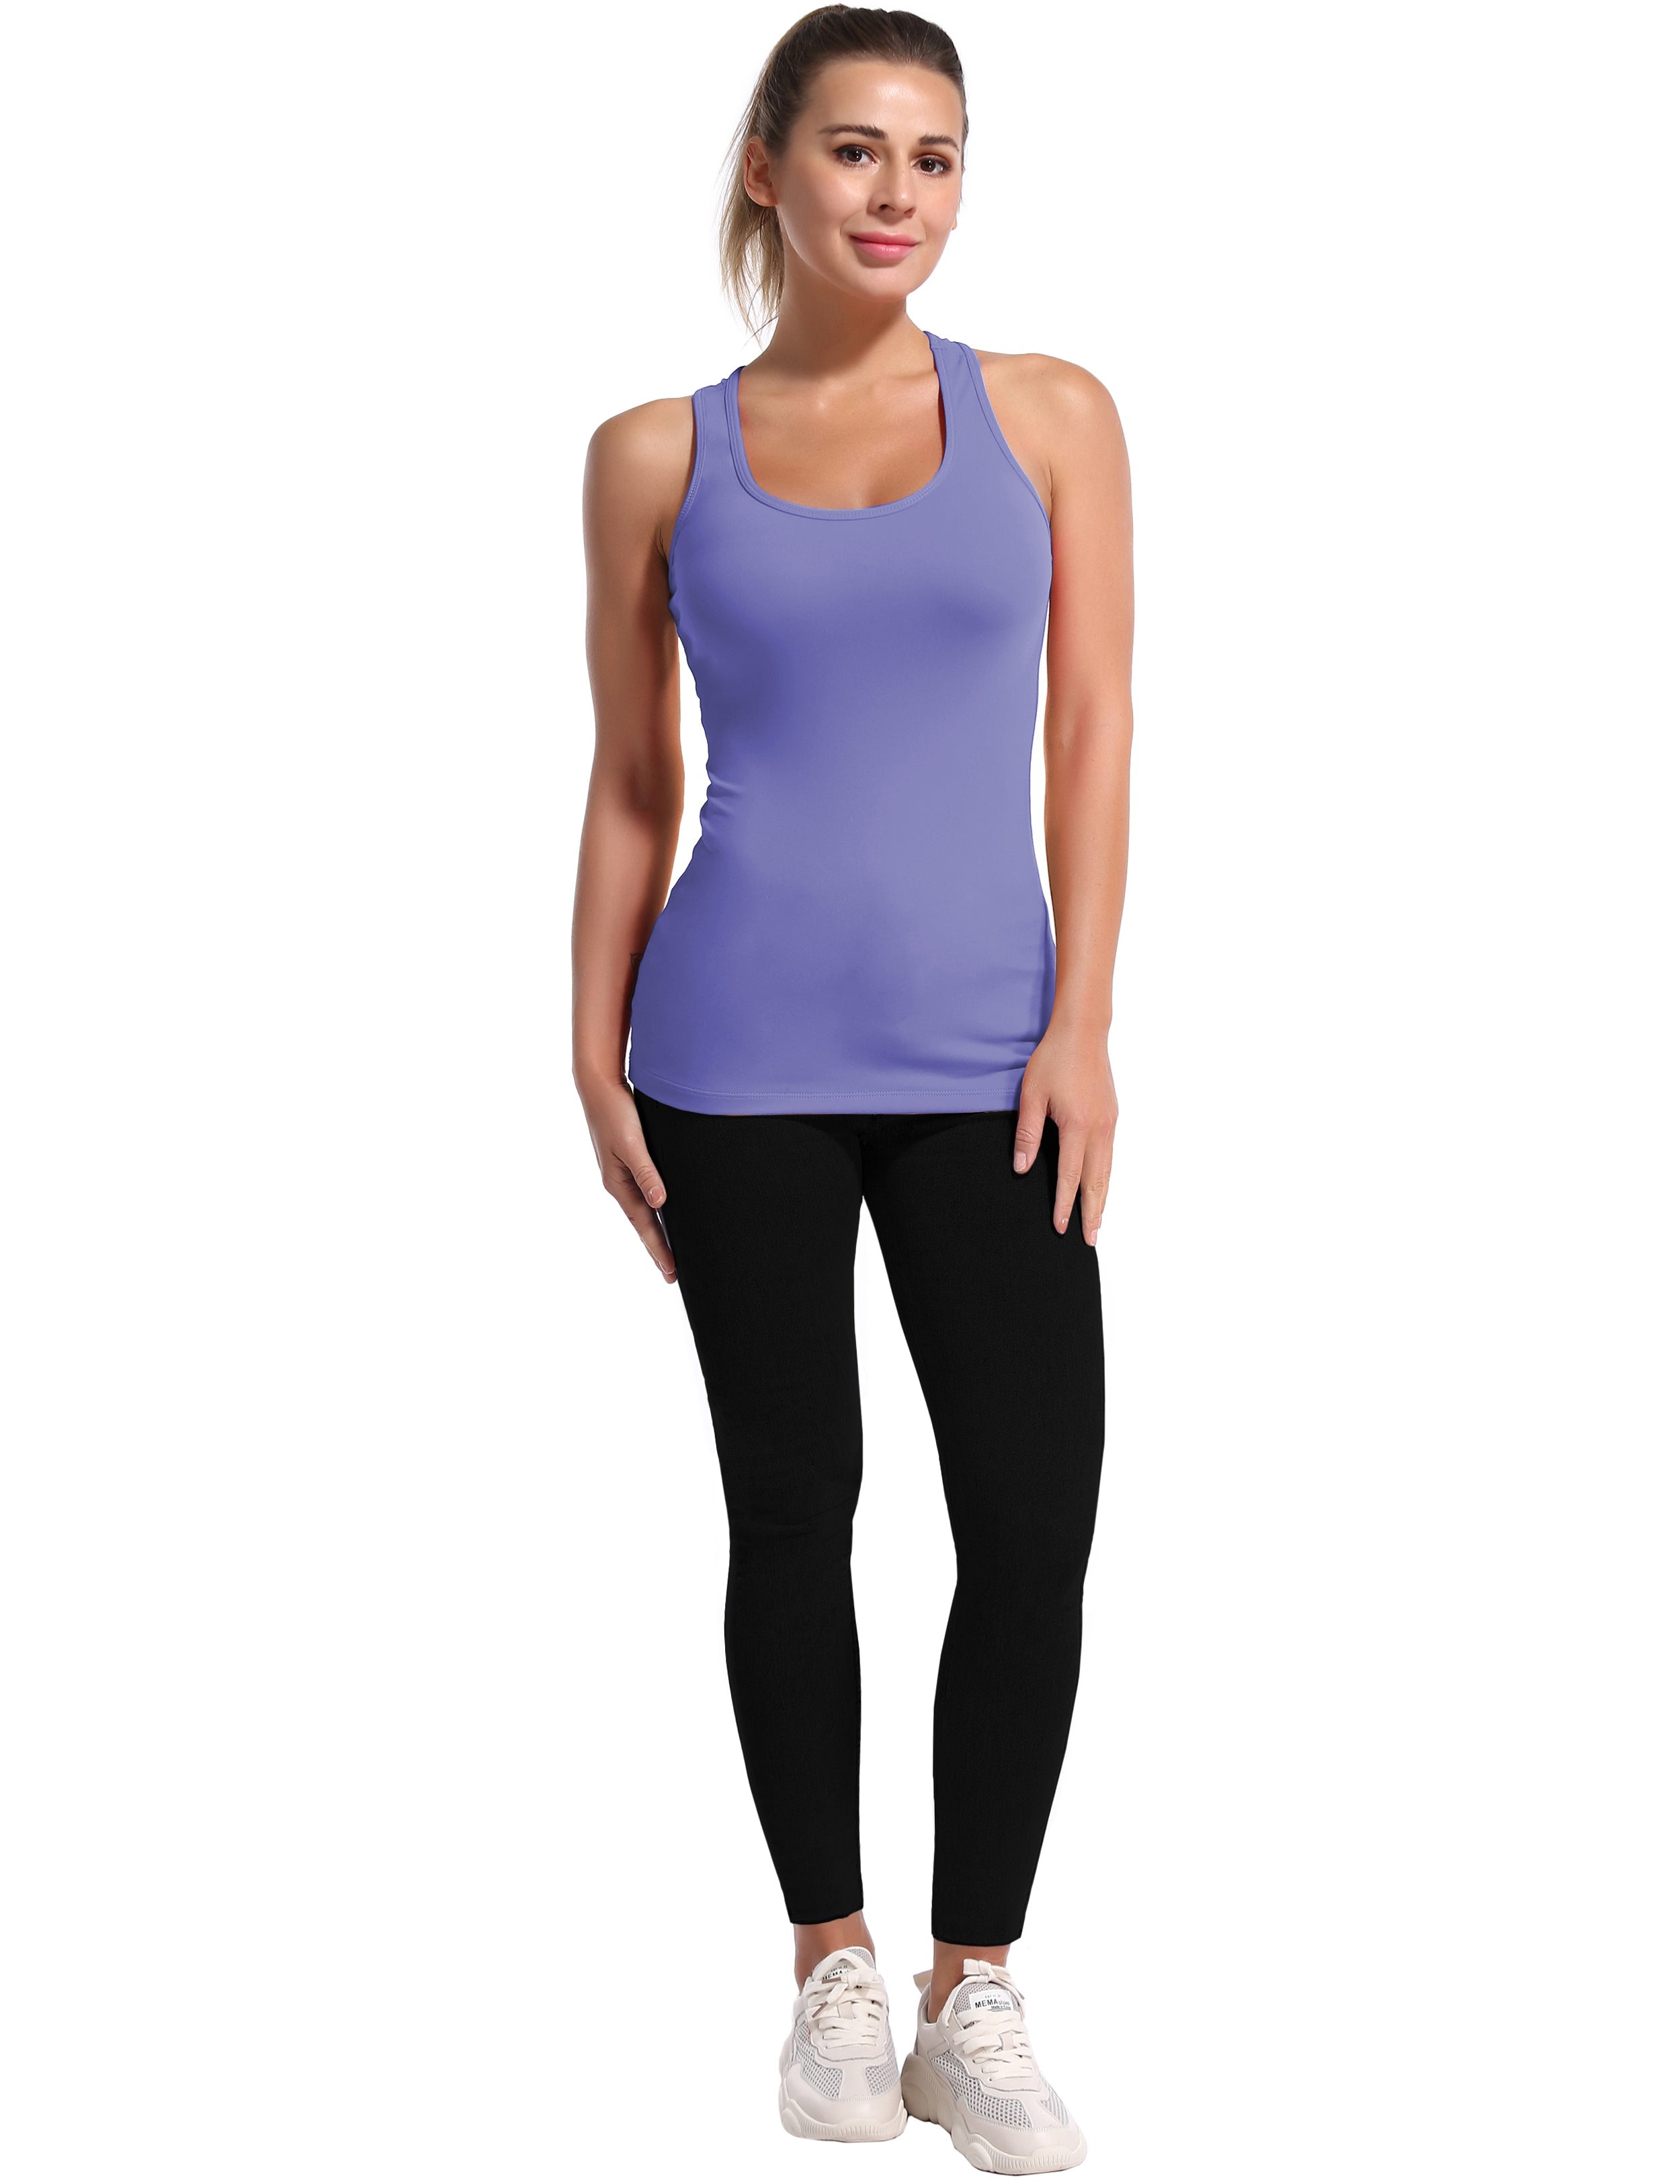 Racerback Athletic Tank Tops lavender 92%Nylon/8%Spandex(Cotton Soft) Designed for Jogging Tight Fit So buttery soft, it feels weightless Sweat-wicking Four-way stretch Breathable Contours your body Sits below the waistband for moderate, everyday coverage